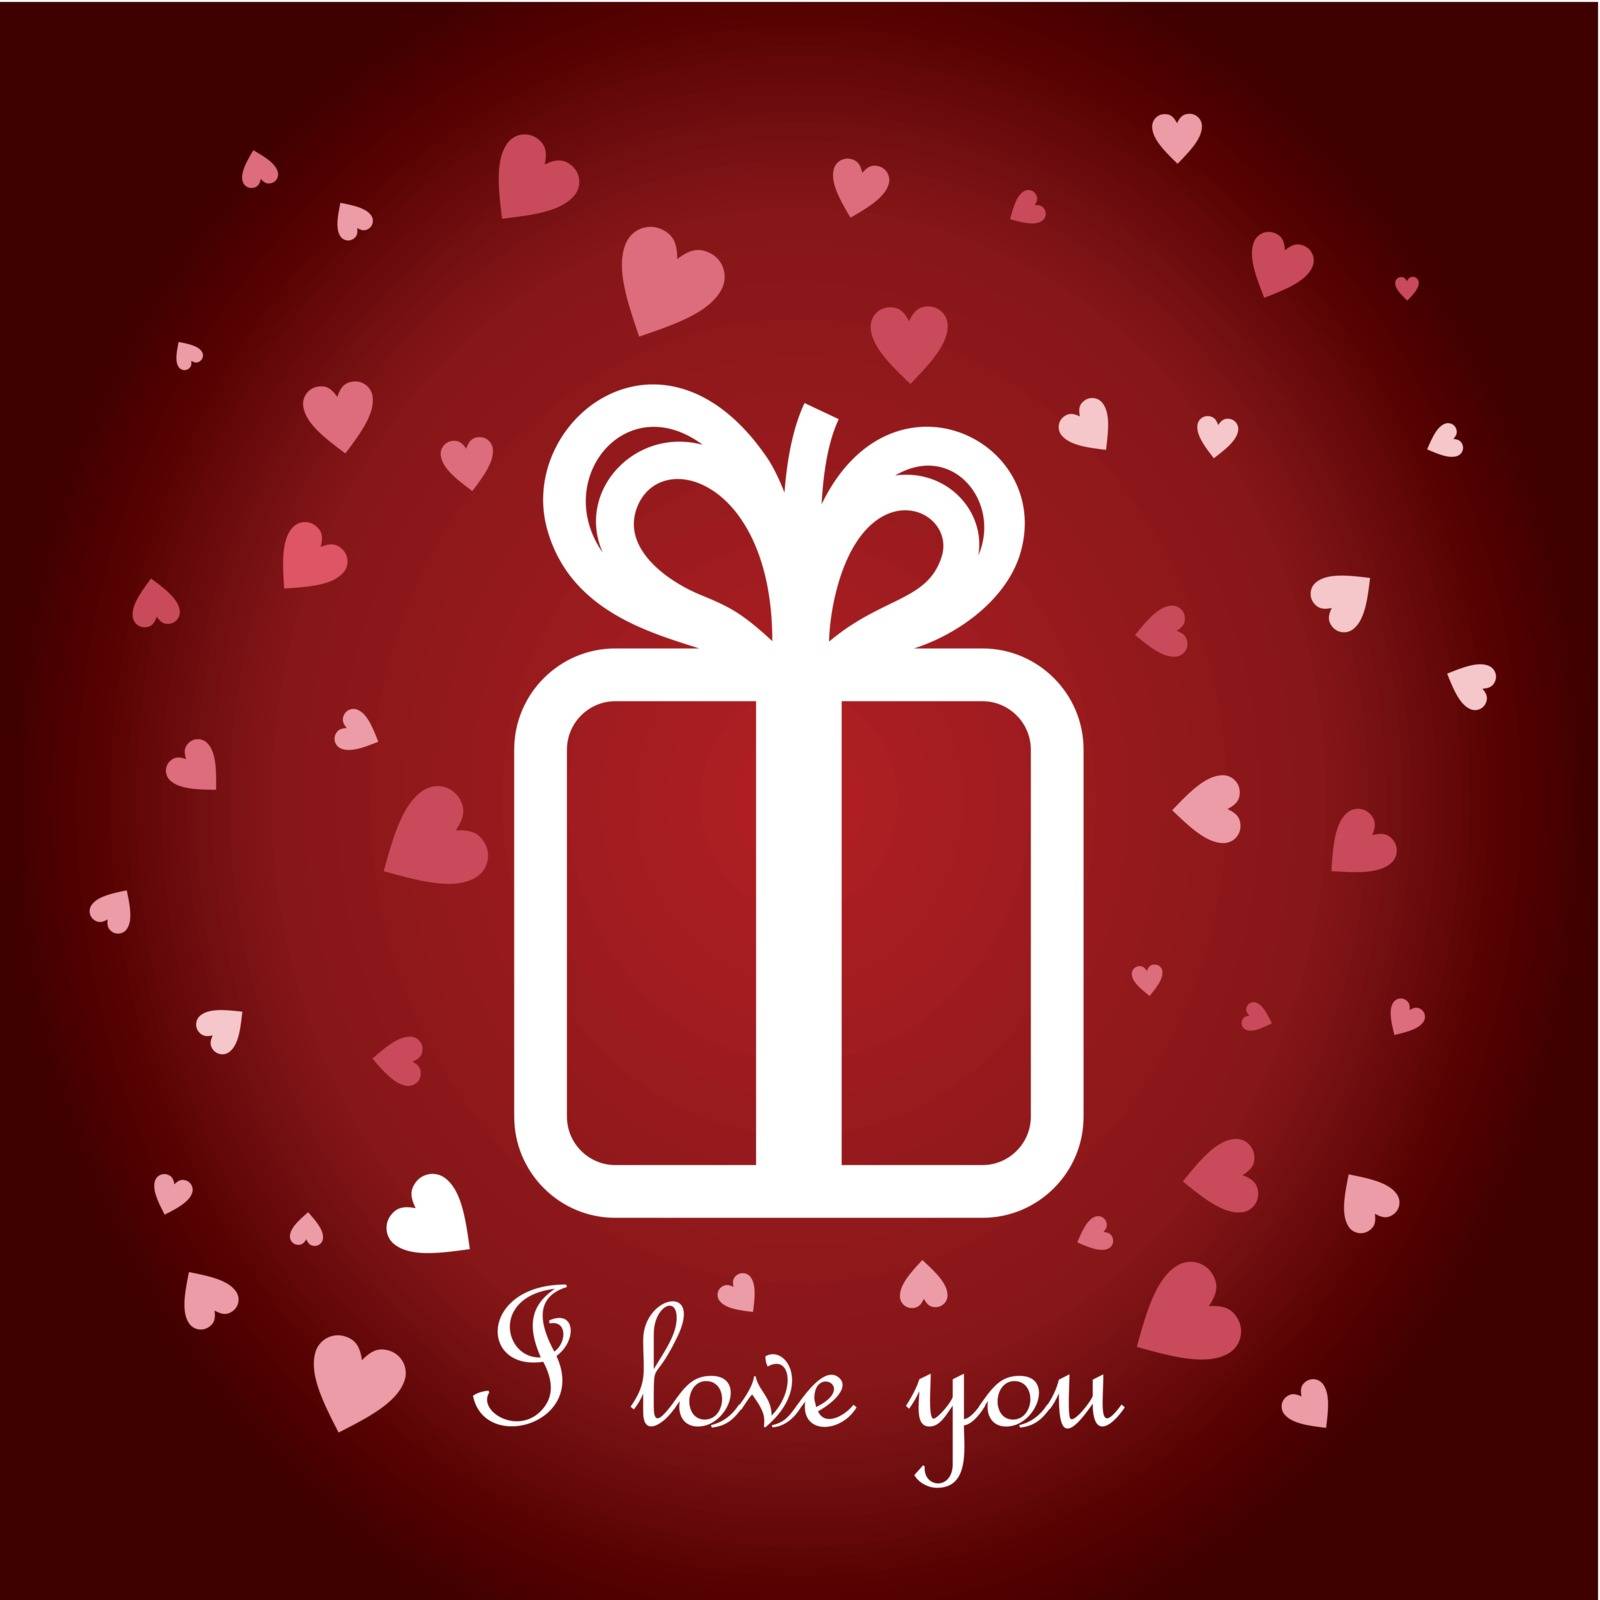 Gift on a red background